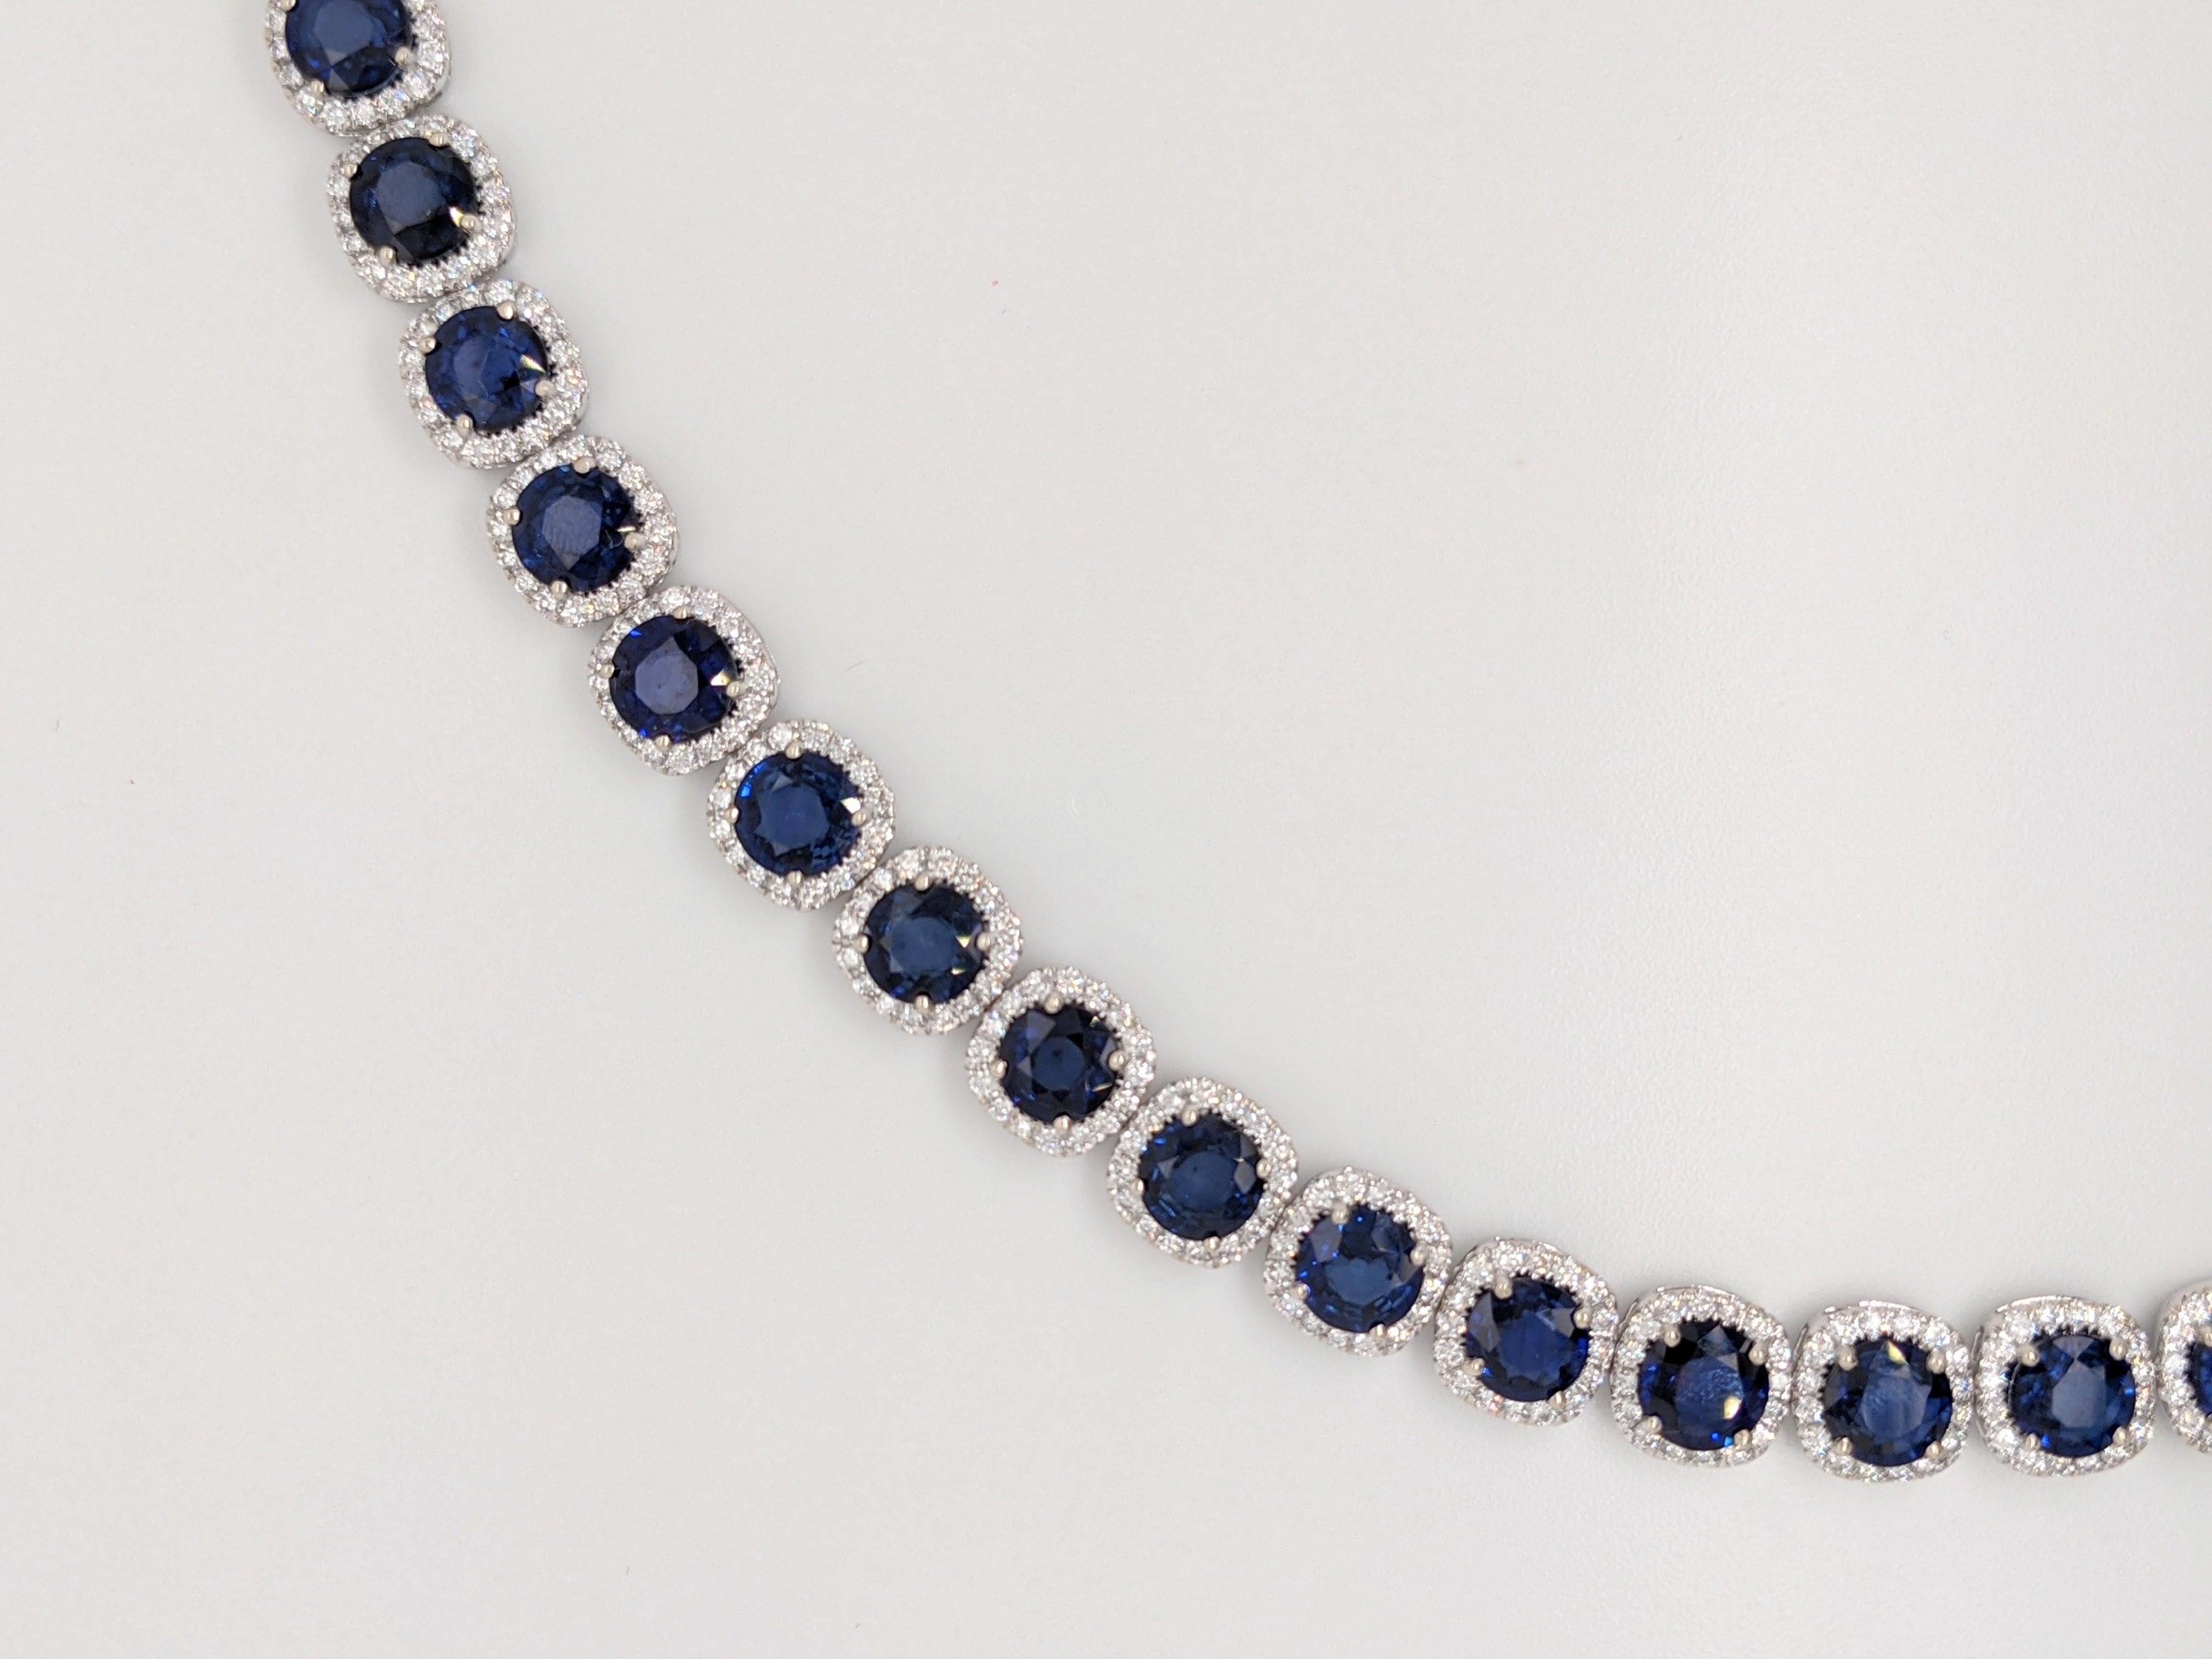 Center Stone: Sapphire
Shape/size: Round 6mm
Approx Weight: 23.36cts, 19 pieces
Treatment: Diffusion
Shape: Round
Head size: 6mm
Gold weight: 15.6g
Diamond weight: 3.4ct
#of Diamonds: 304

Introducing a mesmerizing sapphire bracelet, exquisitely